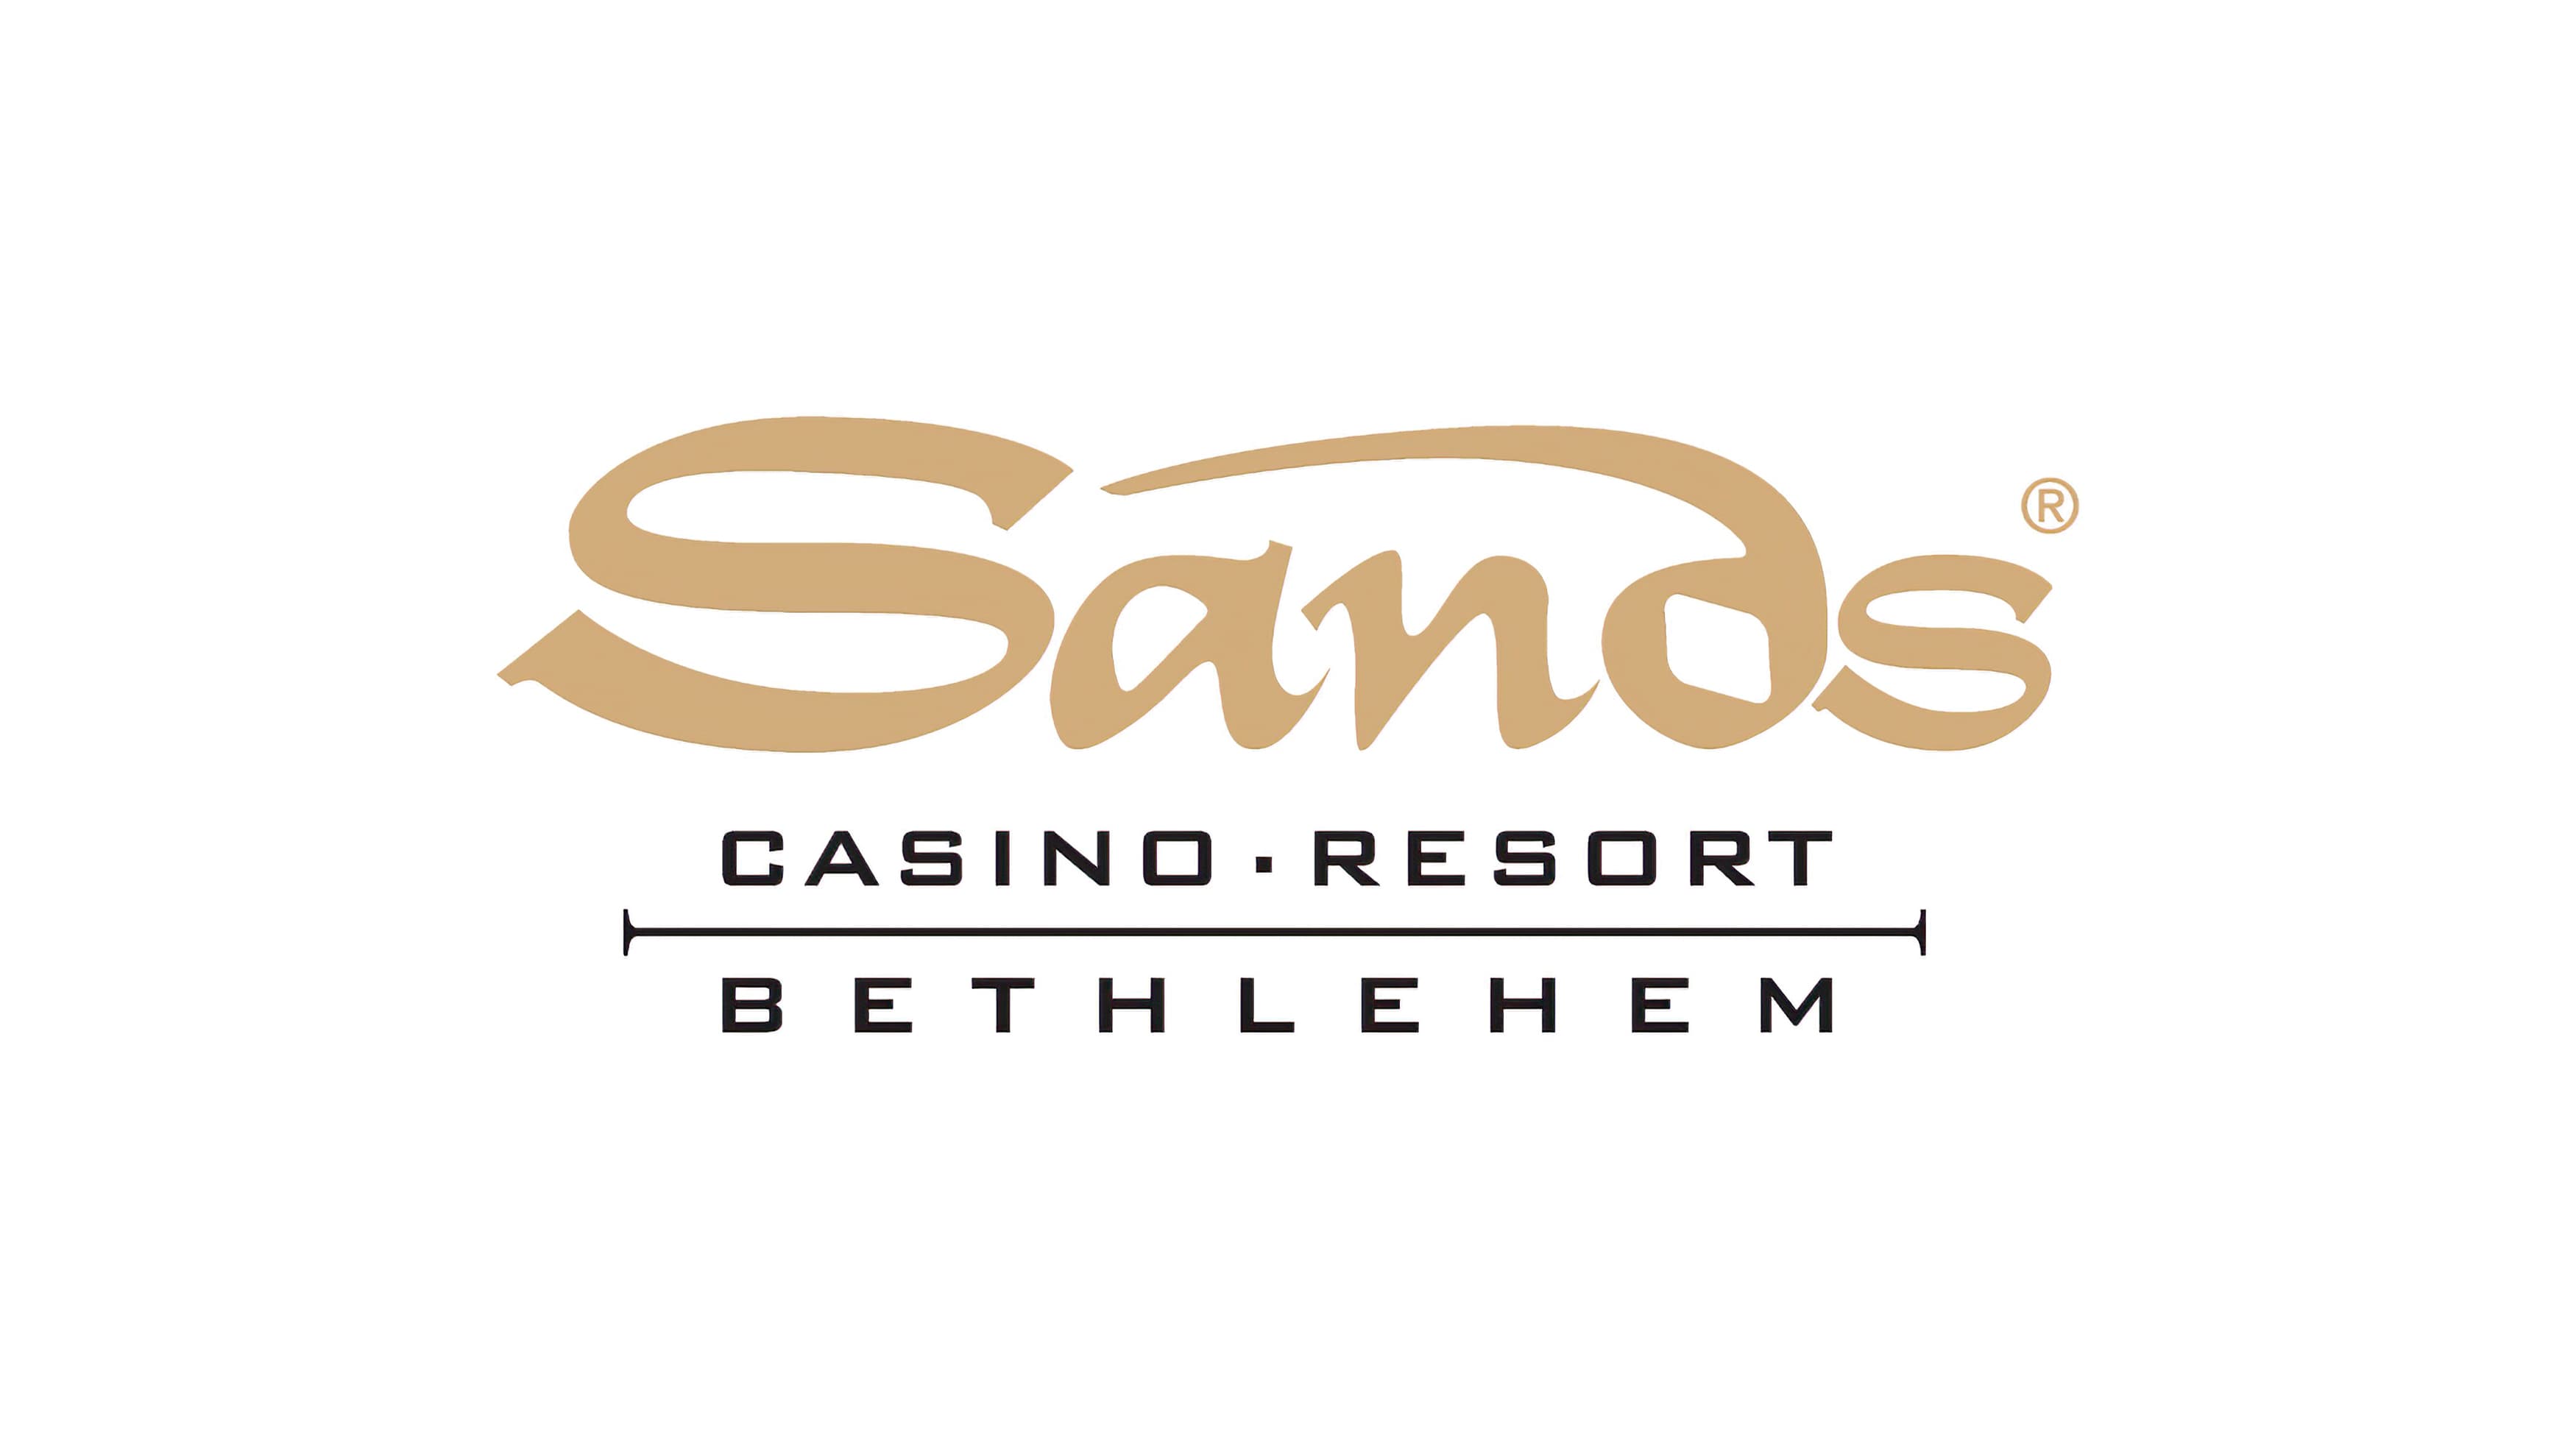 The design created for Sands Casino Resort featuring a golden colored brand logo